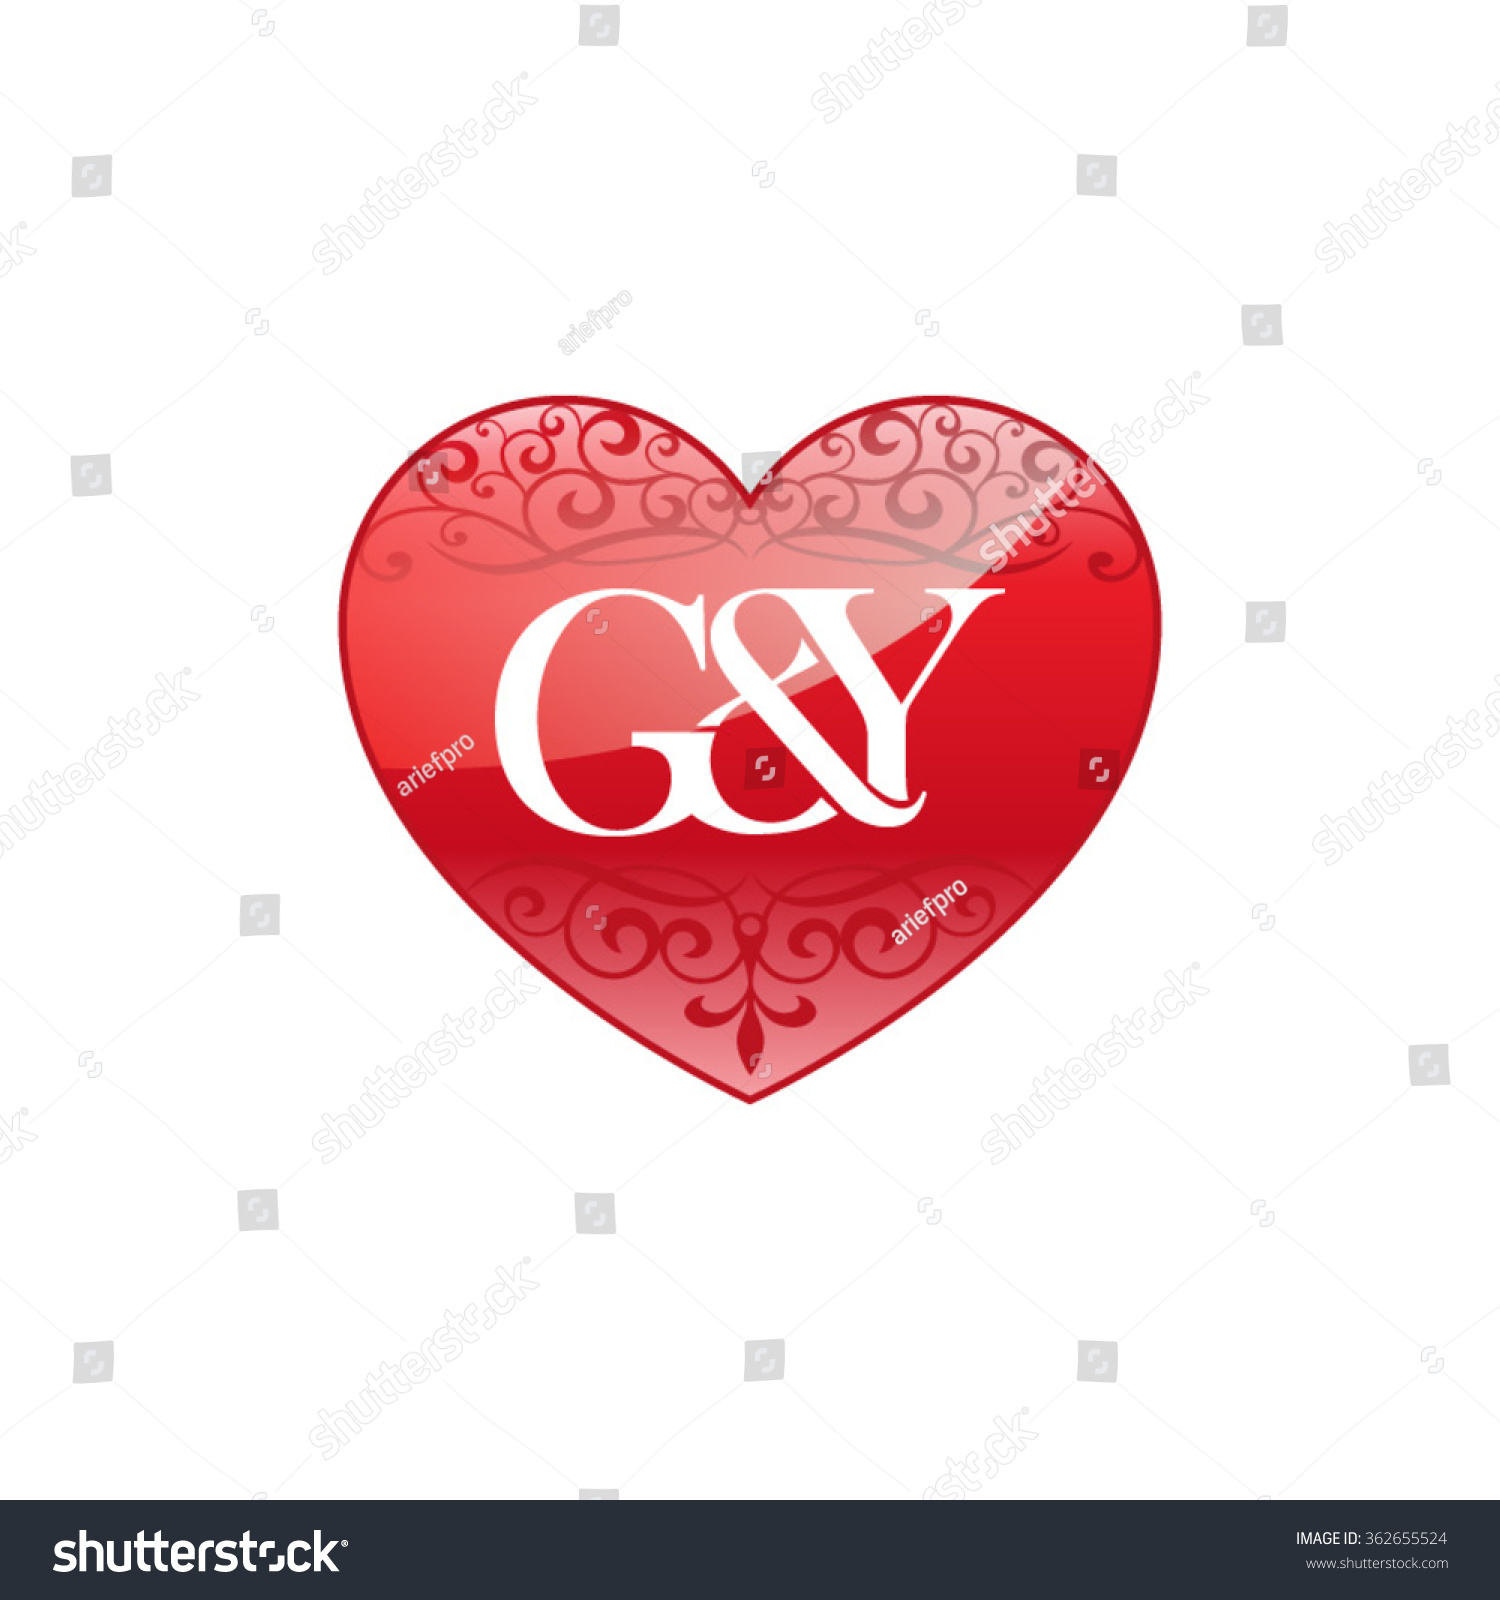 Gy Initial Letter Couple Logo Ornament Stock Vector Royalty Free